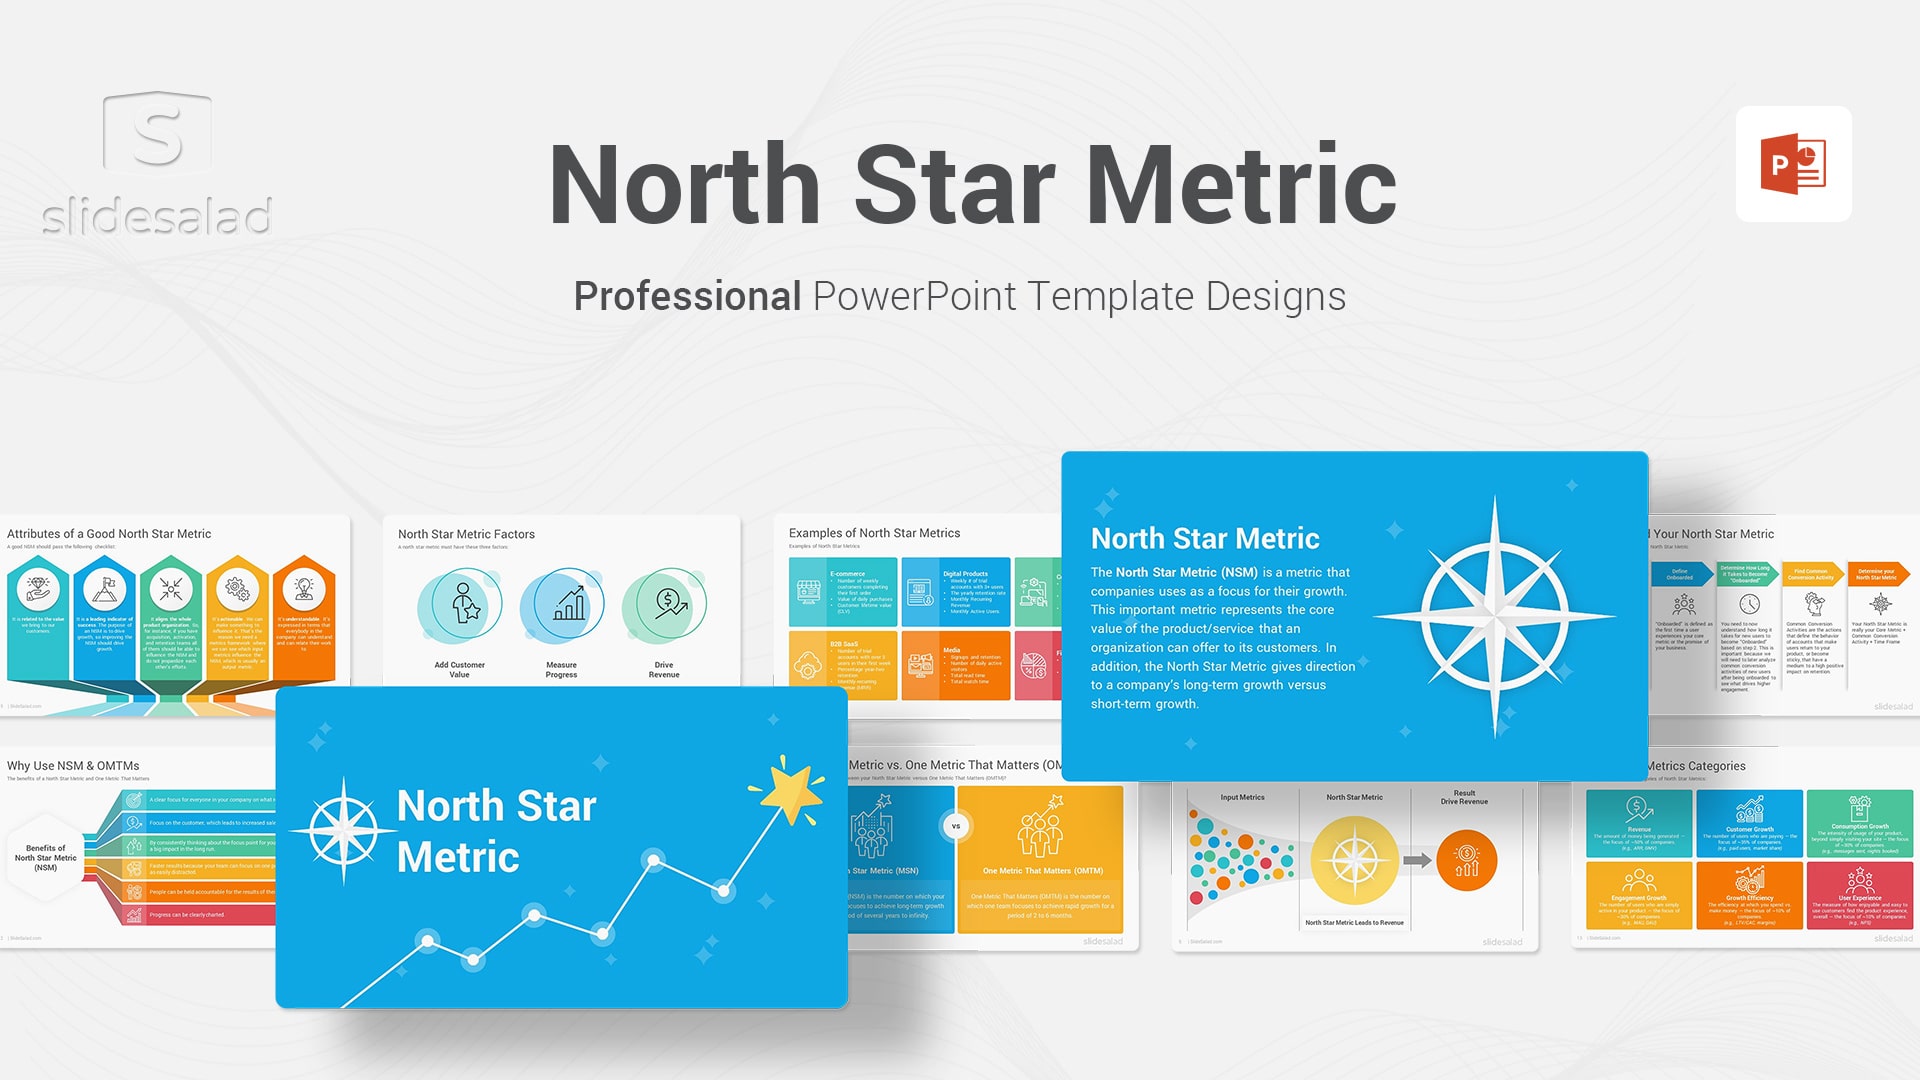 North Star Metric PowerPoint Template Designs - Beautiful Way to Illustrate Company's Long-Term Success